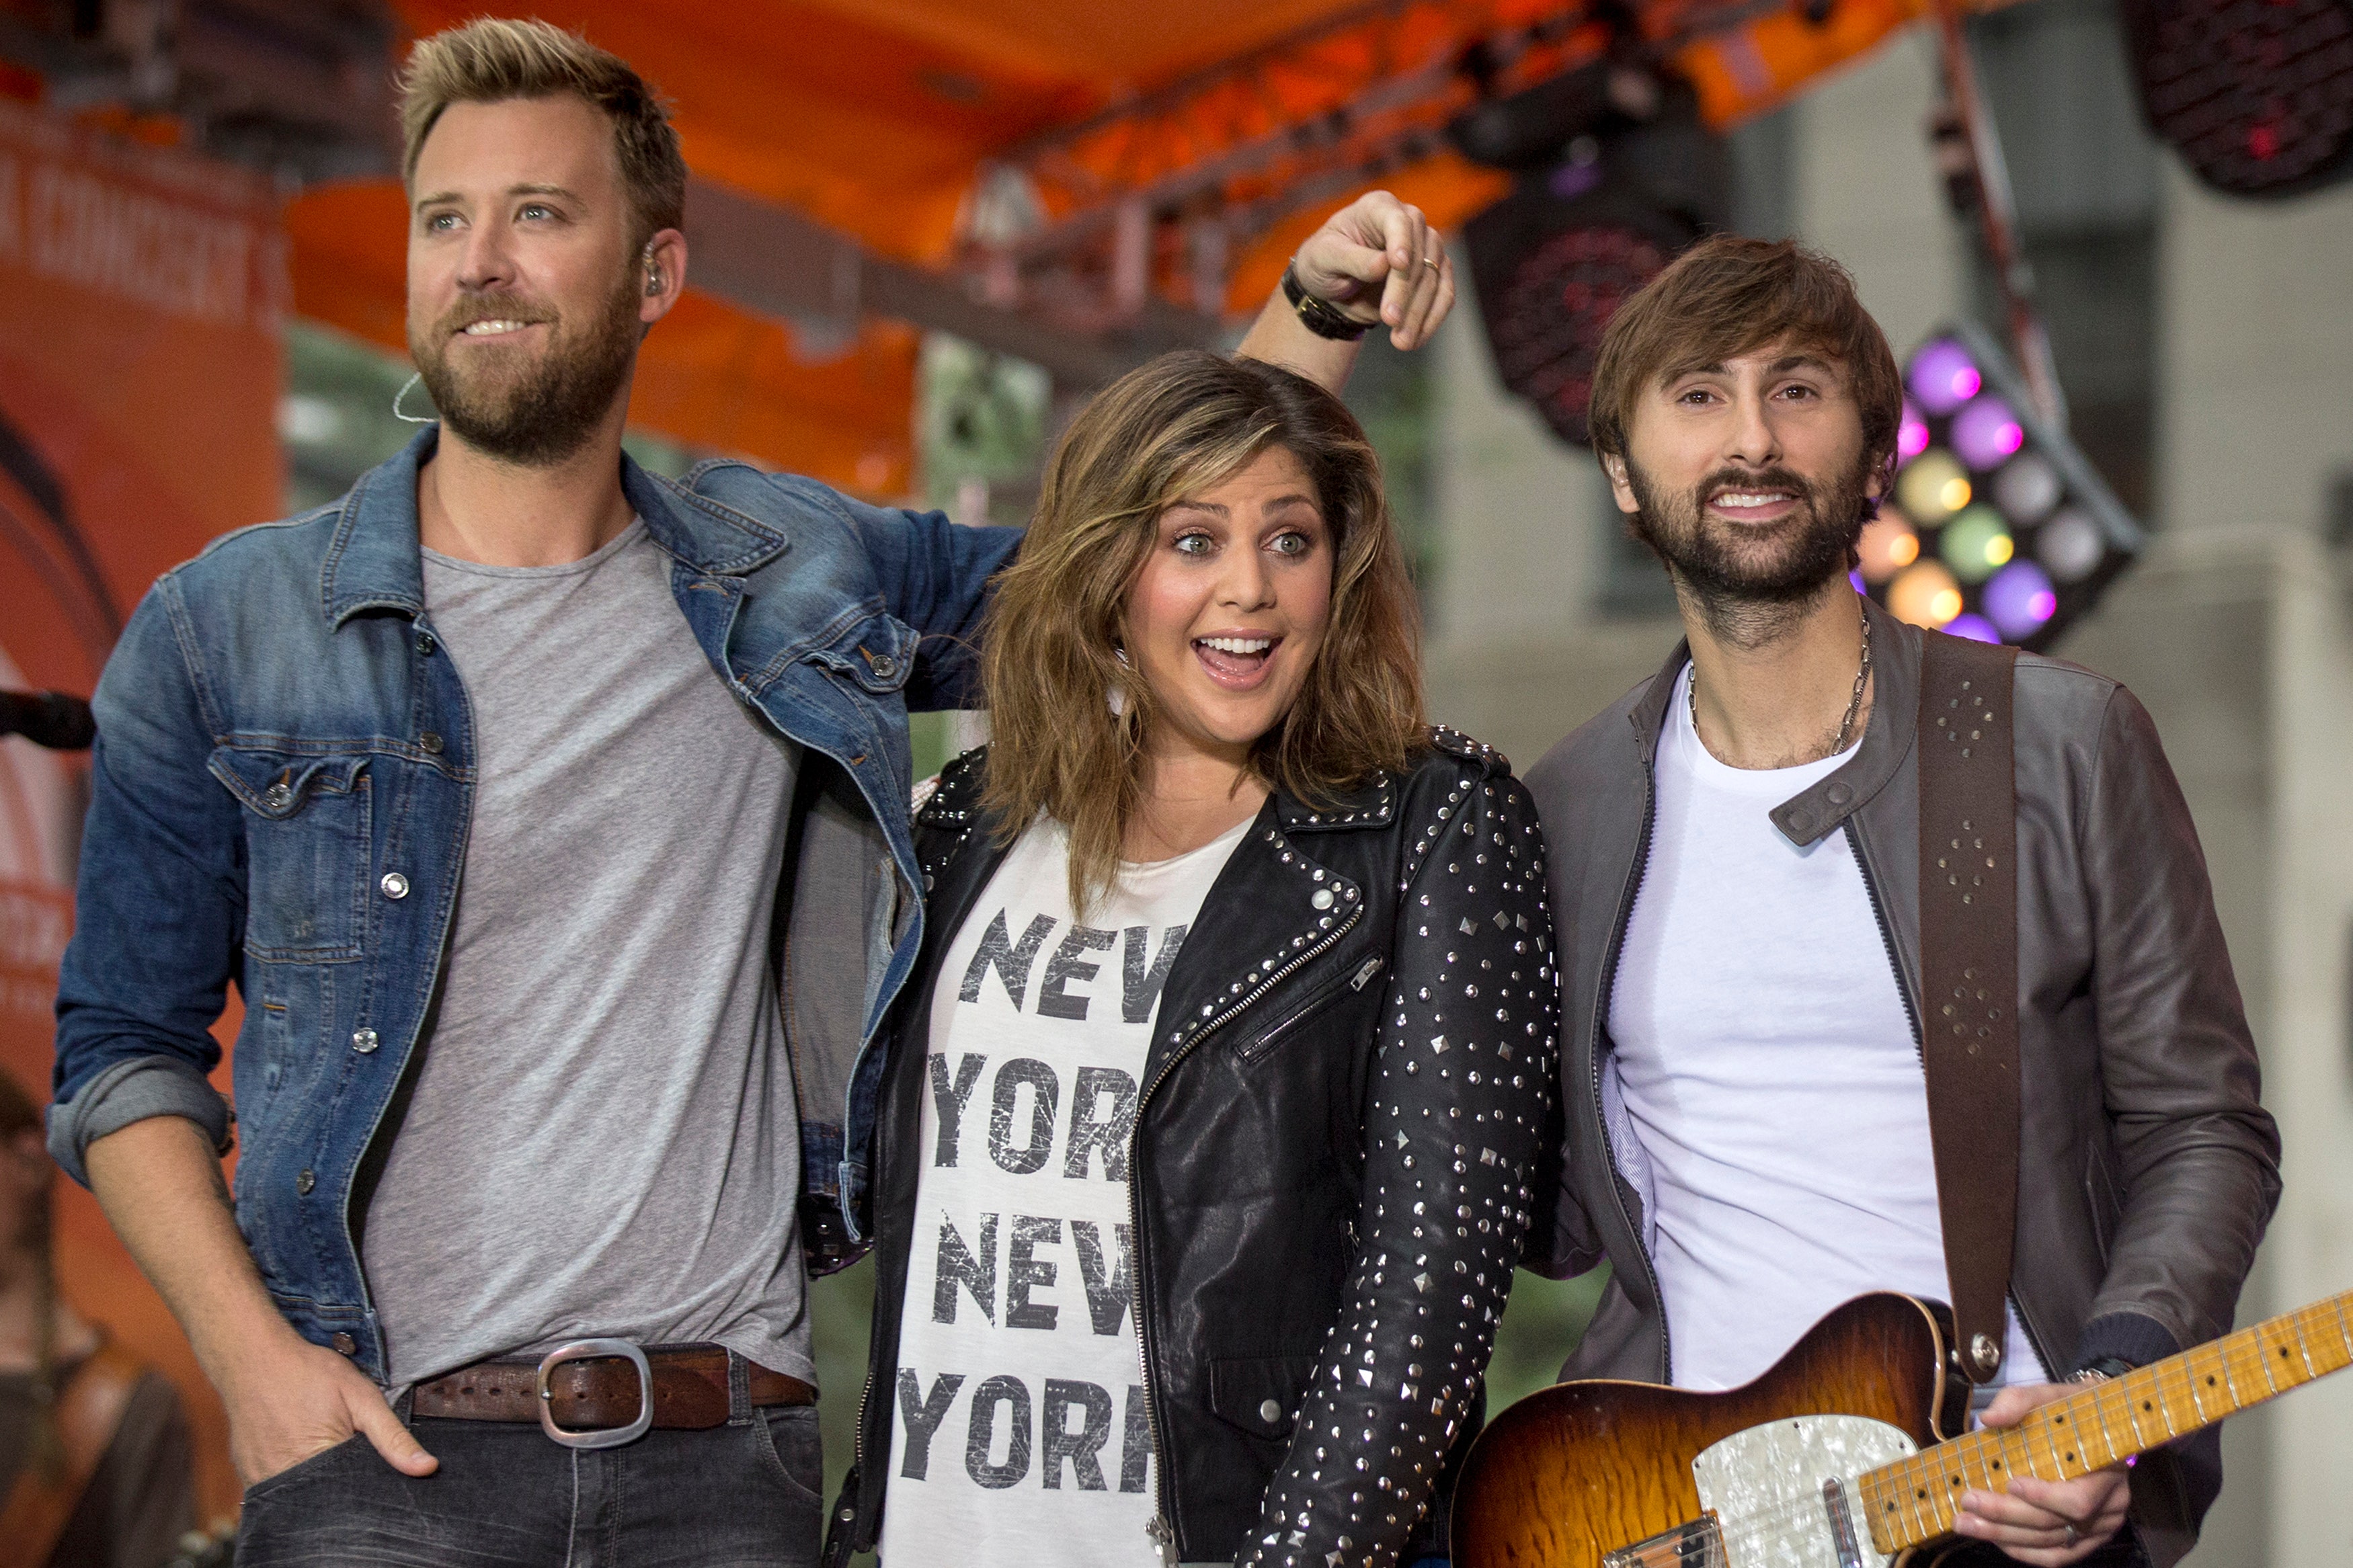 Lady Antebellum's Hillary Scott safe after tour bus catches on fire